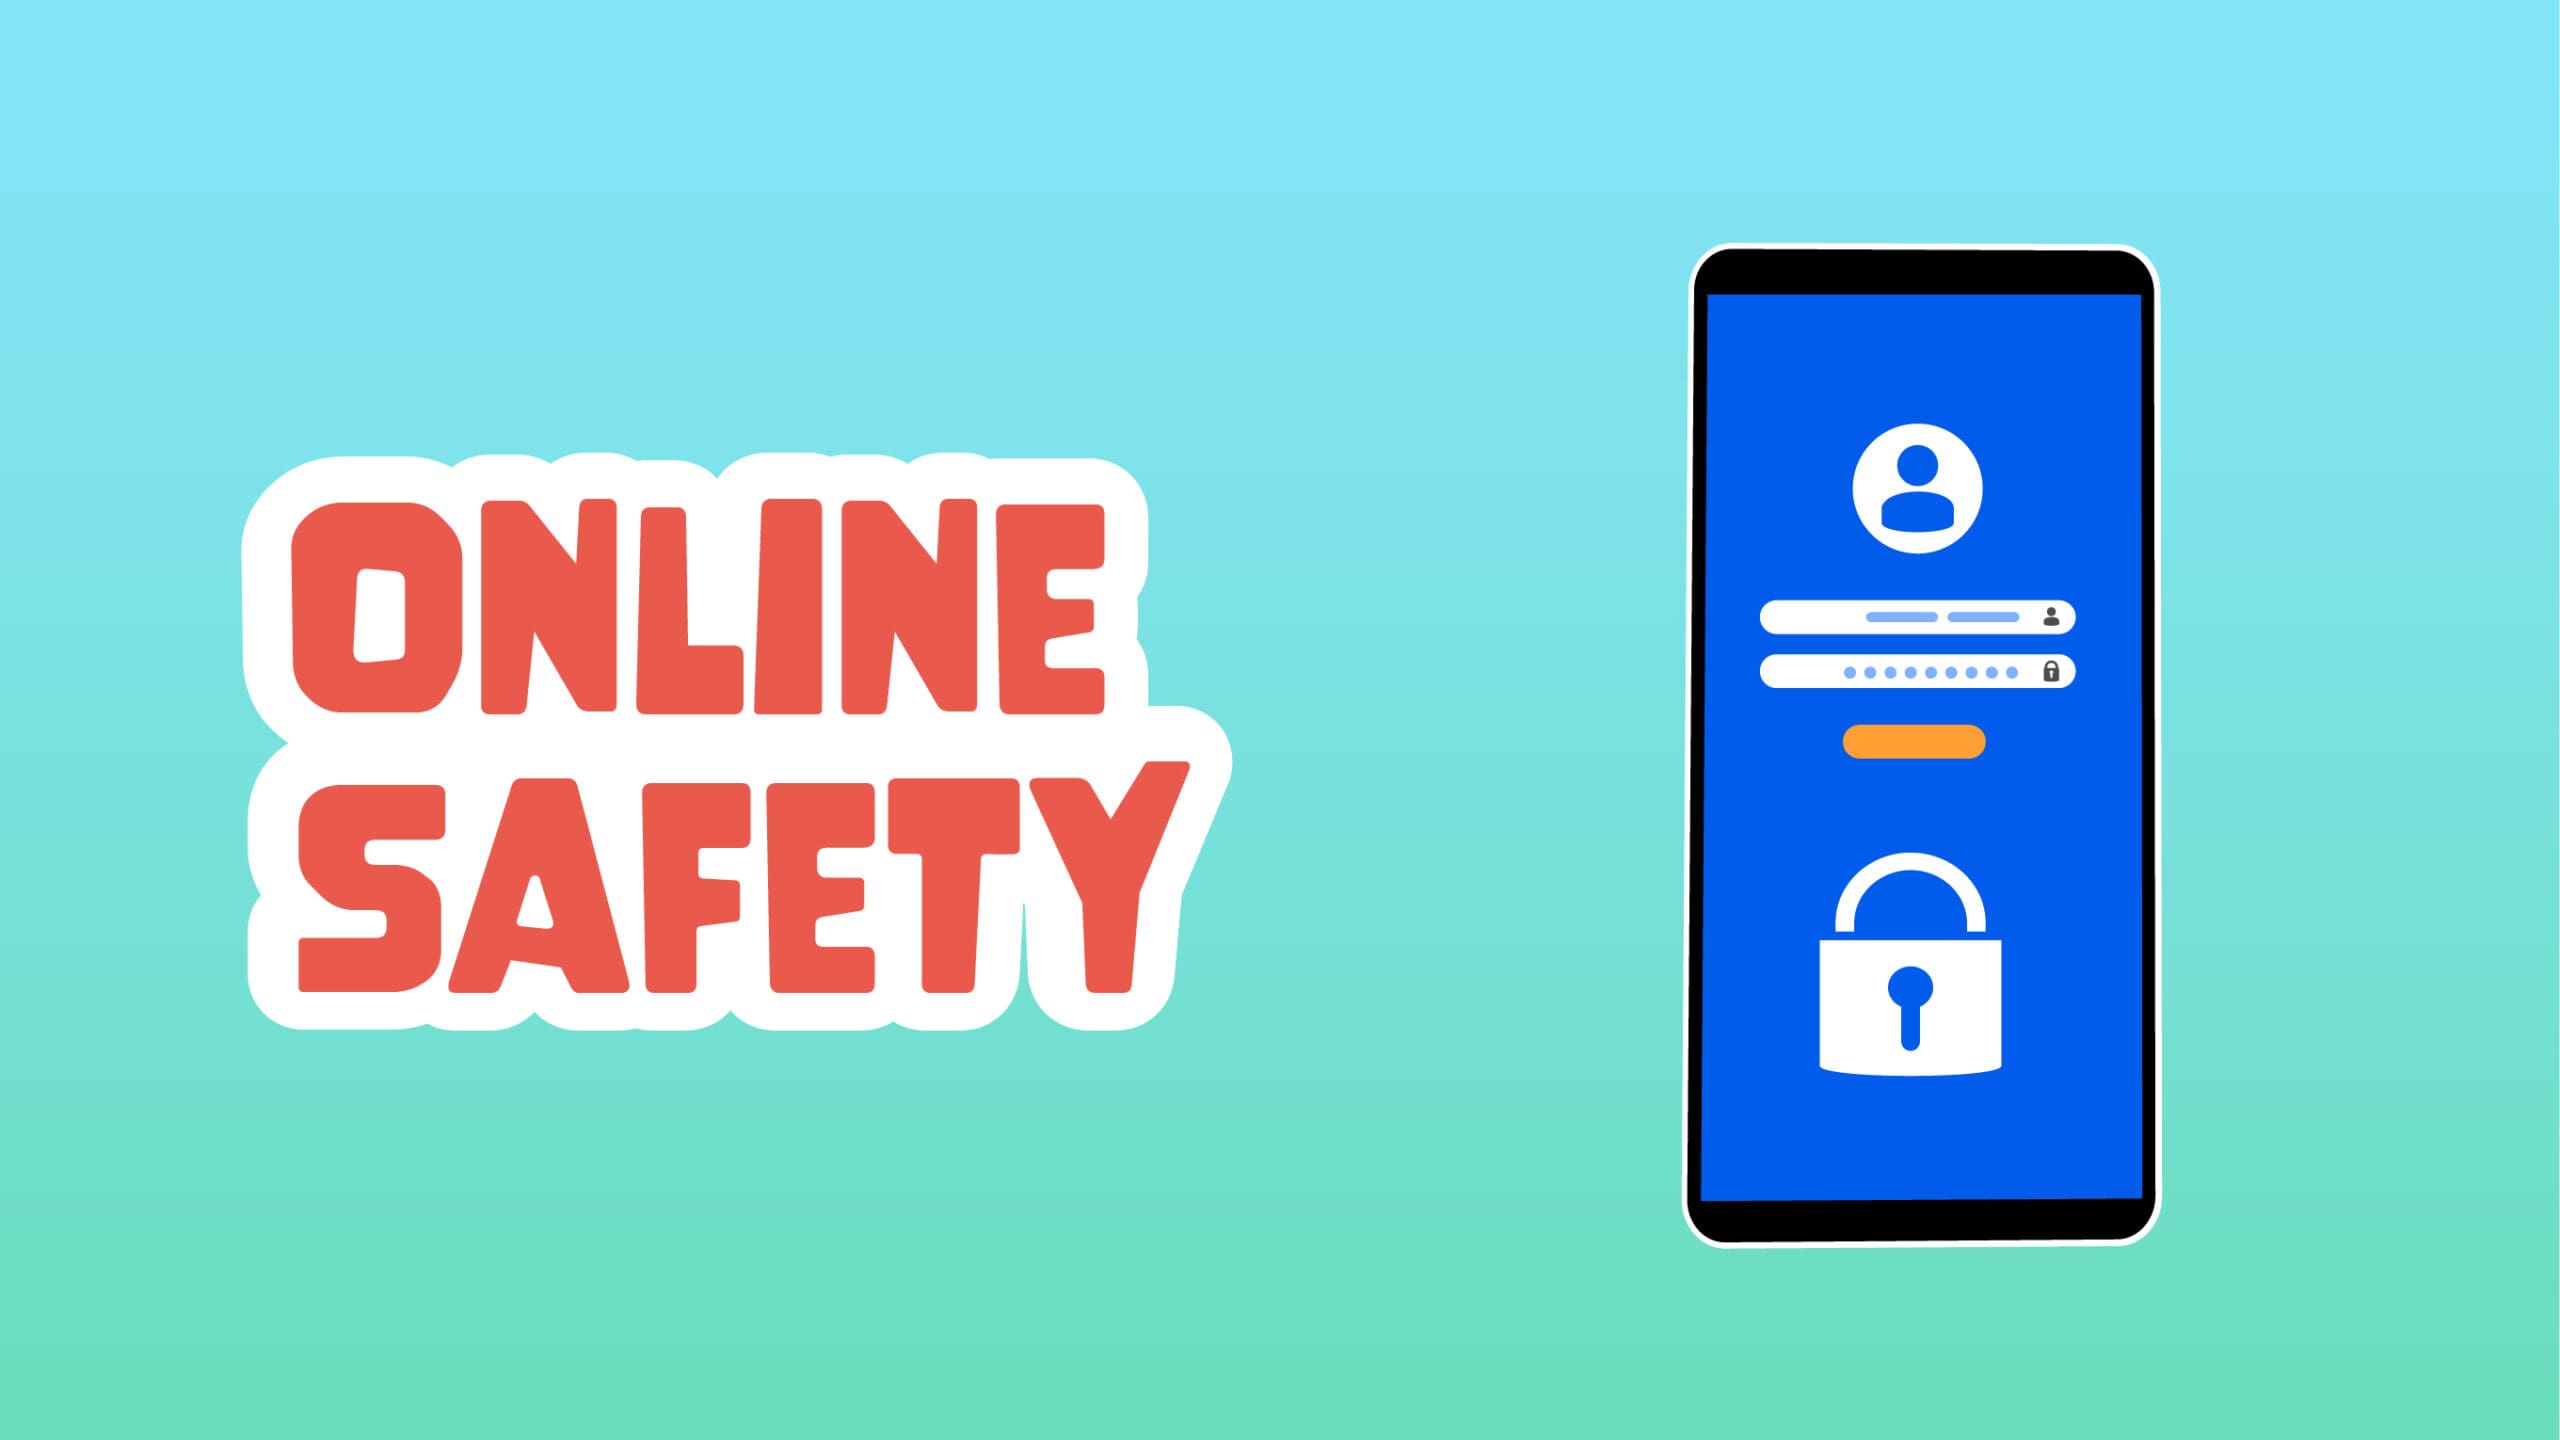 Online Safety Facts for Kids – 5 Super Facts about Online Safety